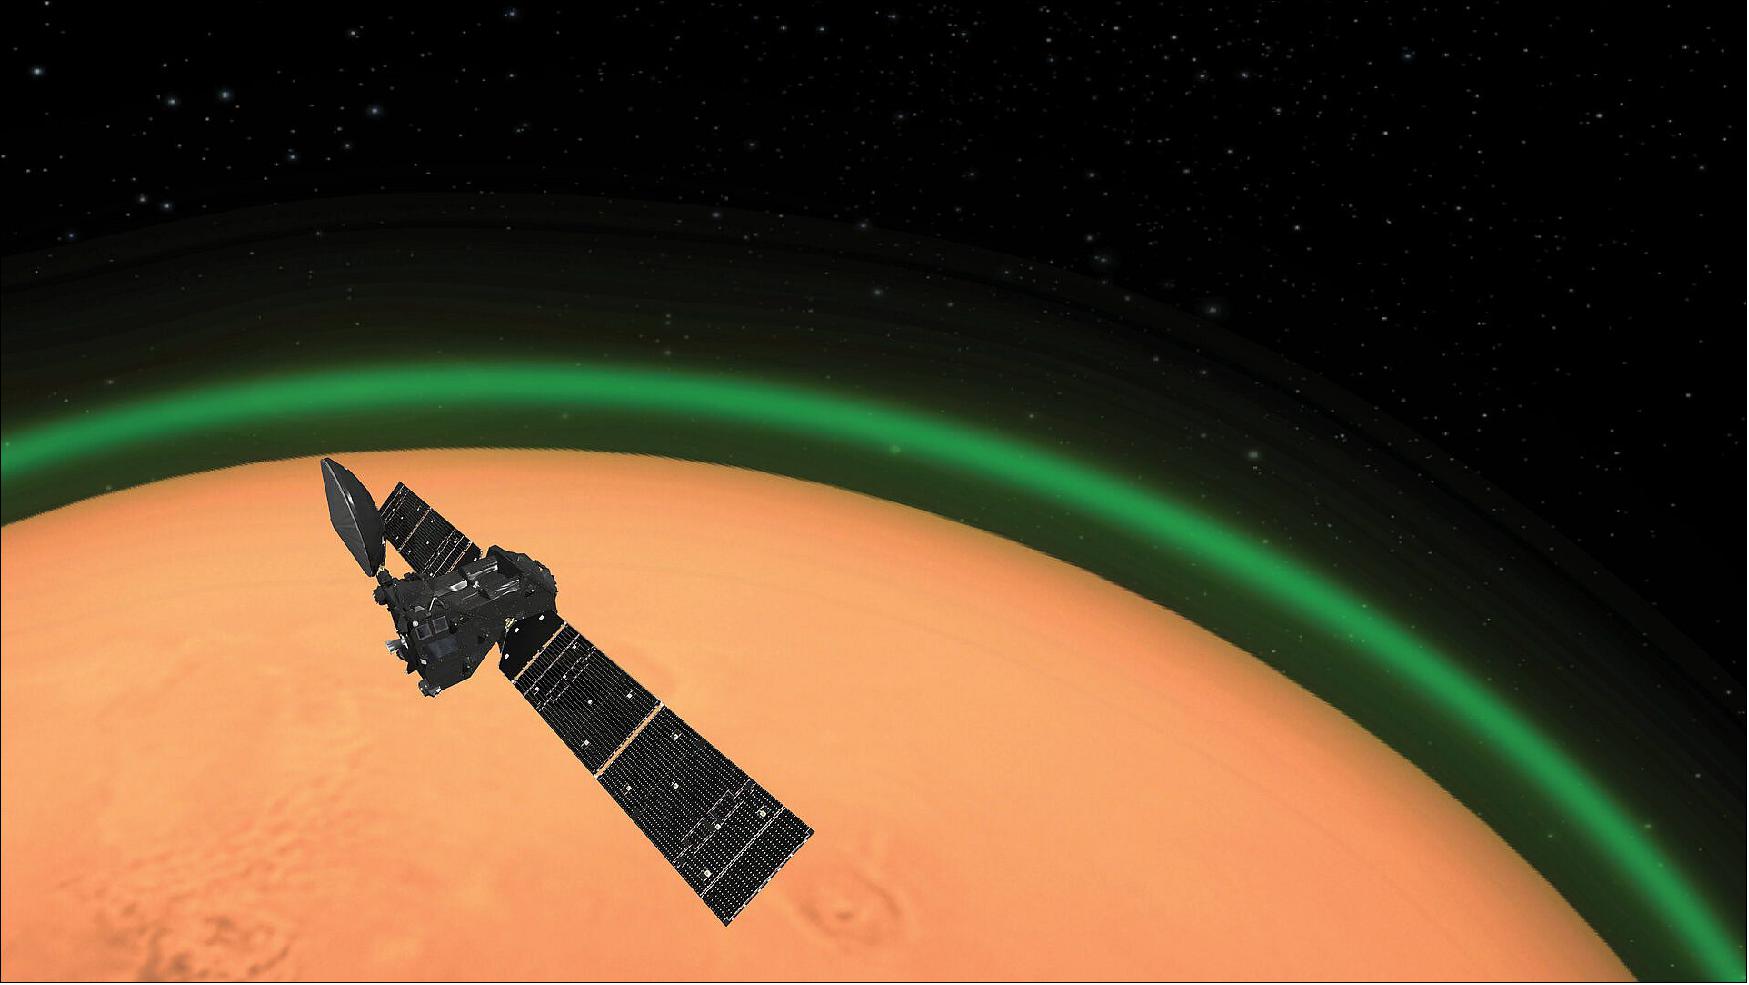 Figure 50: Artist’s impression of ESA’s ExoMars Trace Gas Orbiter detecting the green glow of oxygen in the martian atmosphere. This emission, spotted on the dayside of Mars, is similar to the night glow seen around Earth’s atmosphere from space (image credit: ESA)